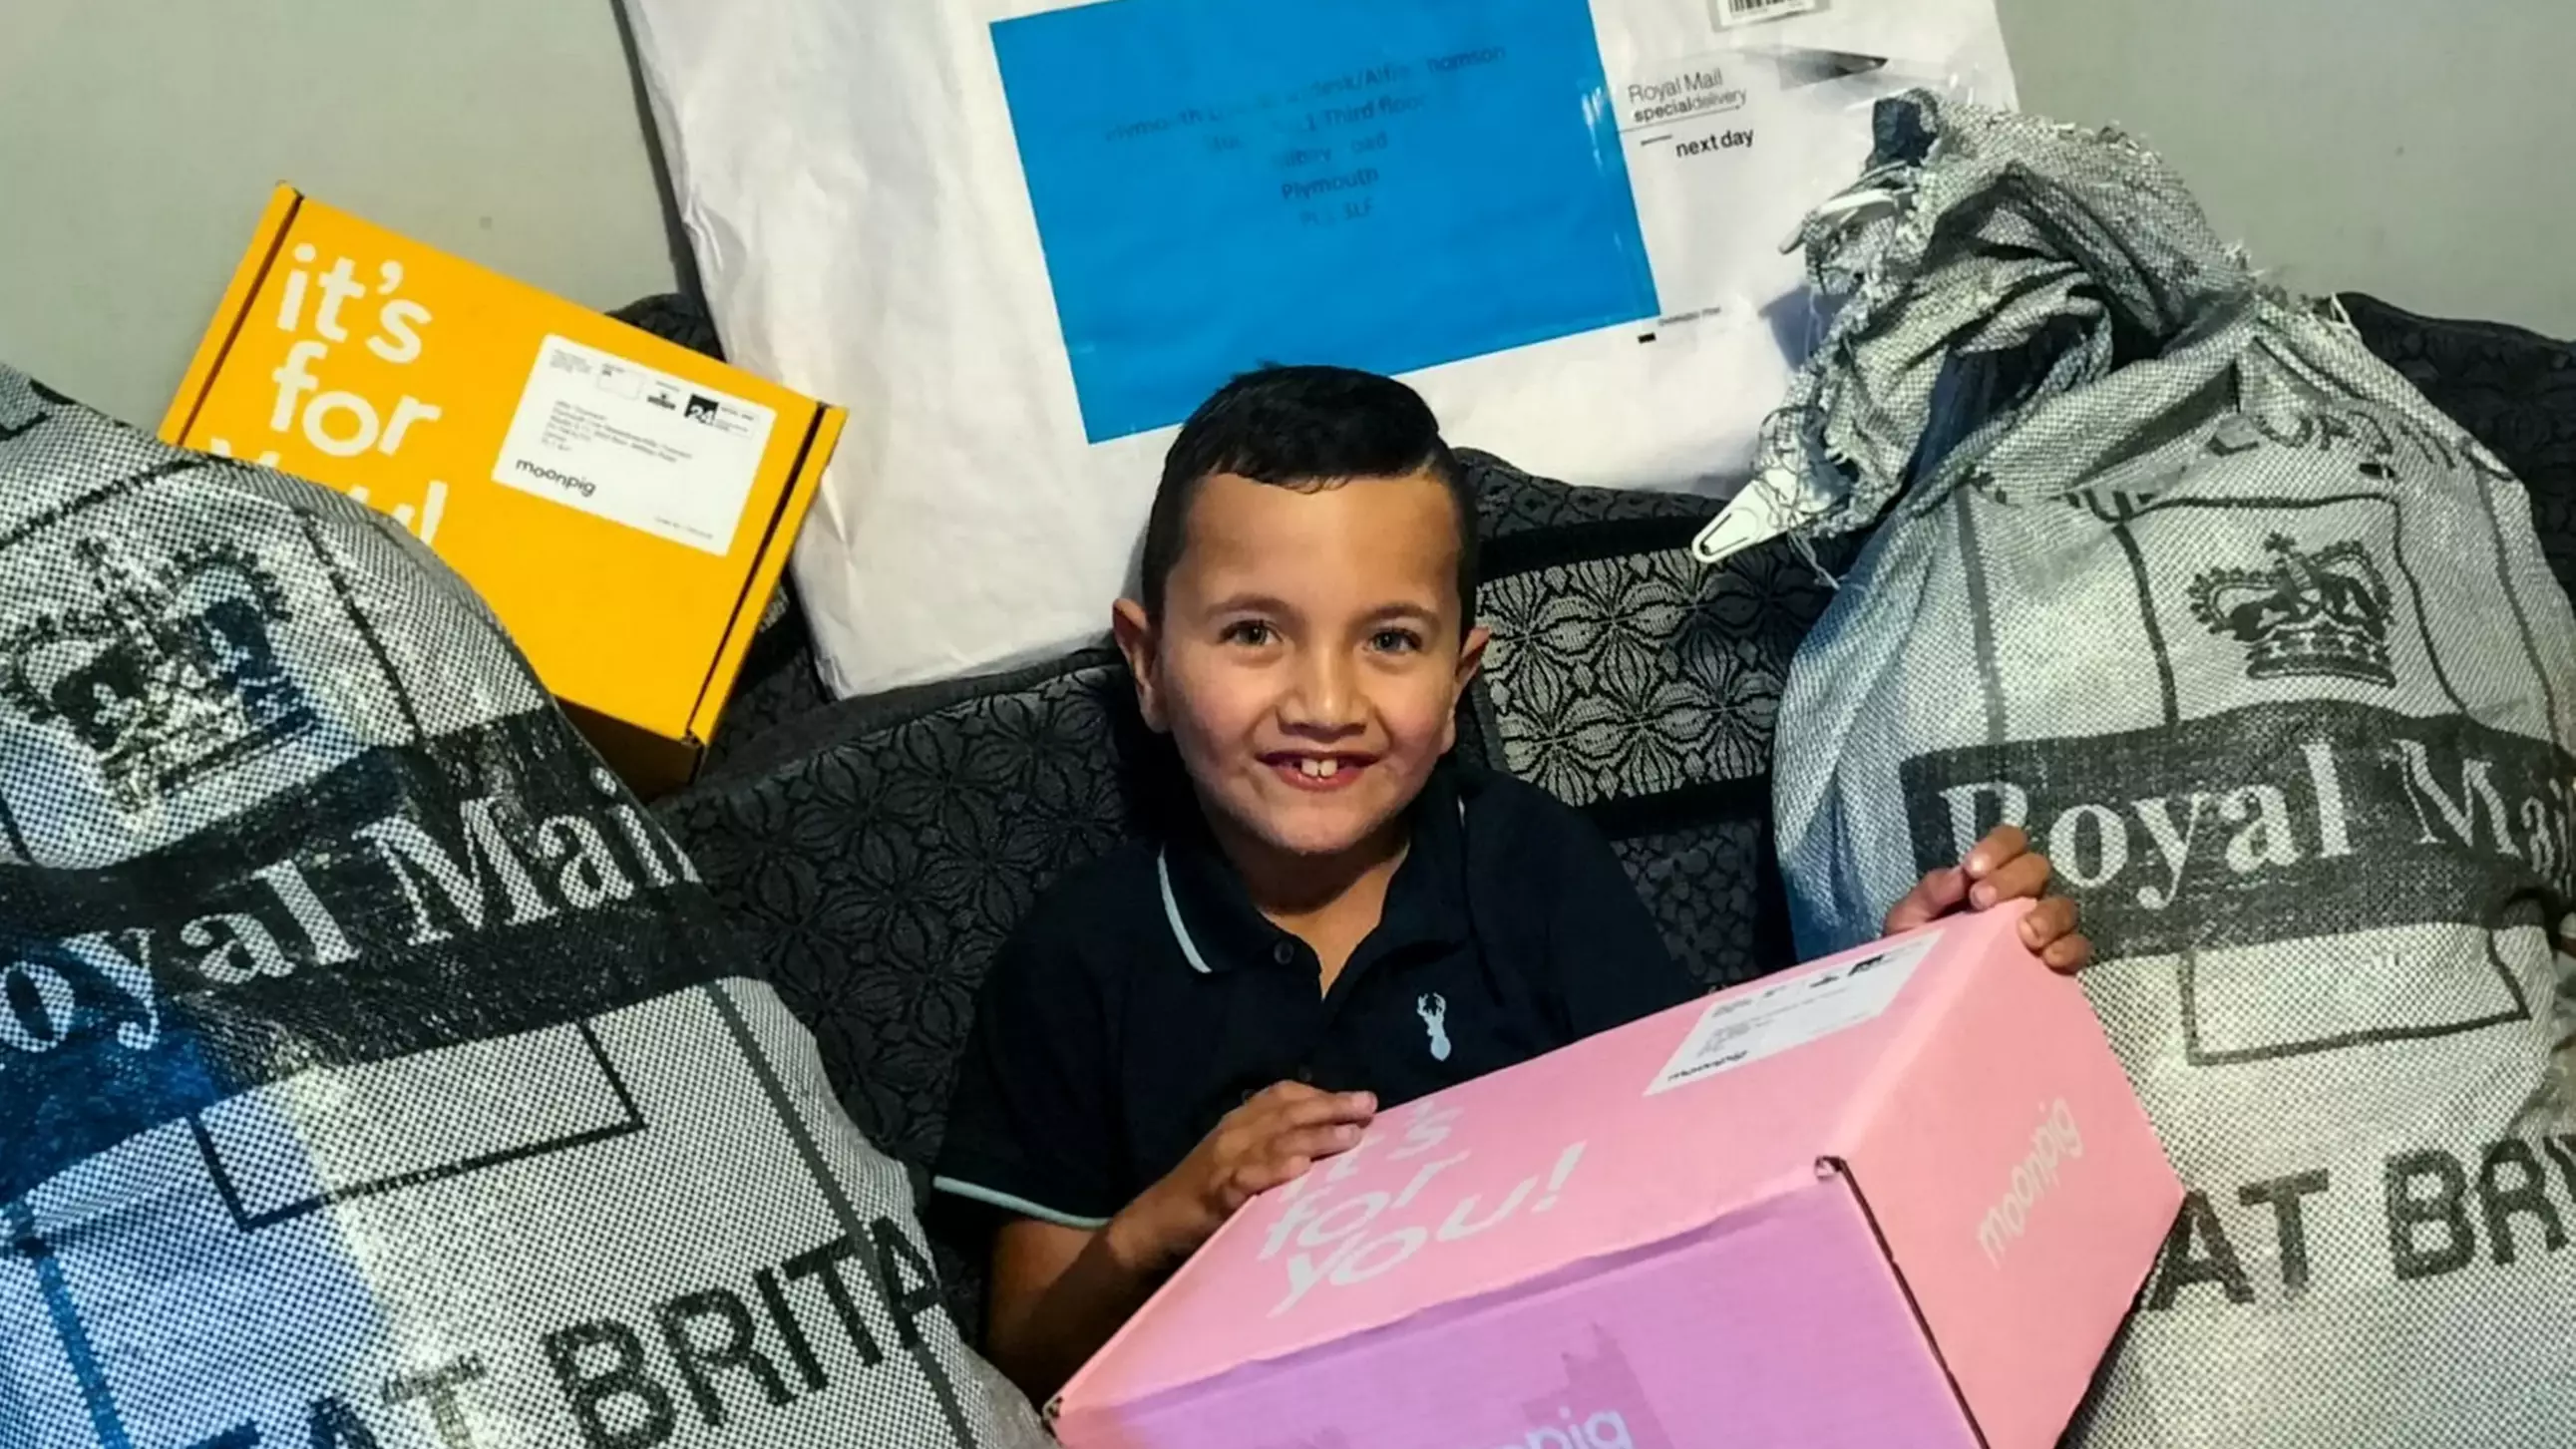 Autistic Boy With Only A Few Friends Receives 3,000 Birthday Cards From Around The World 